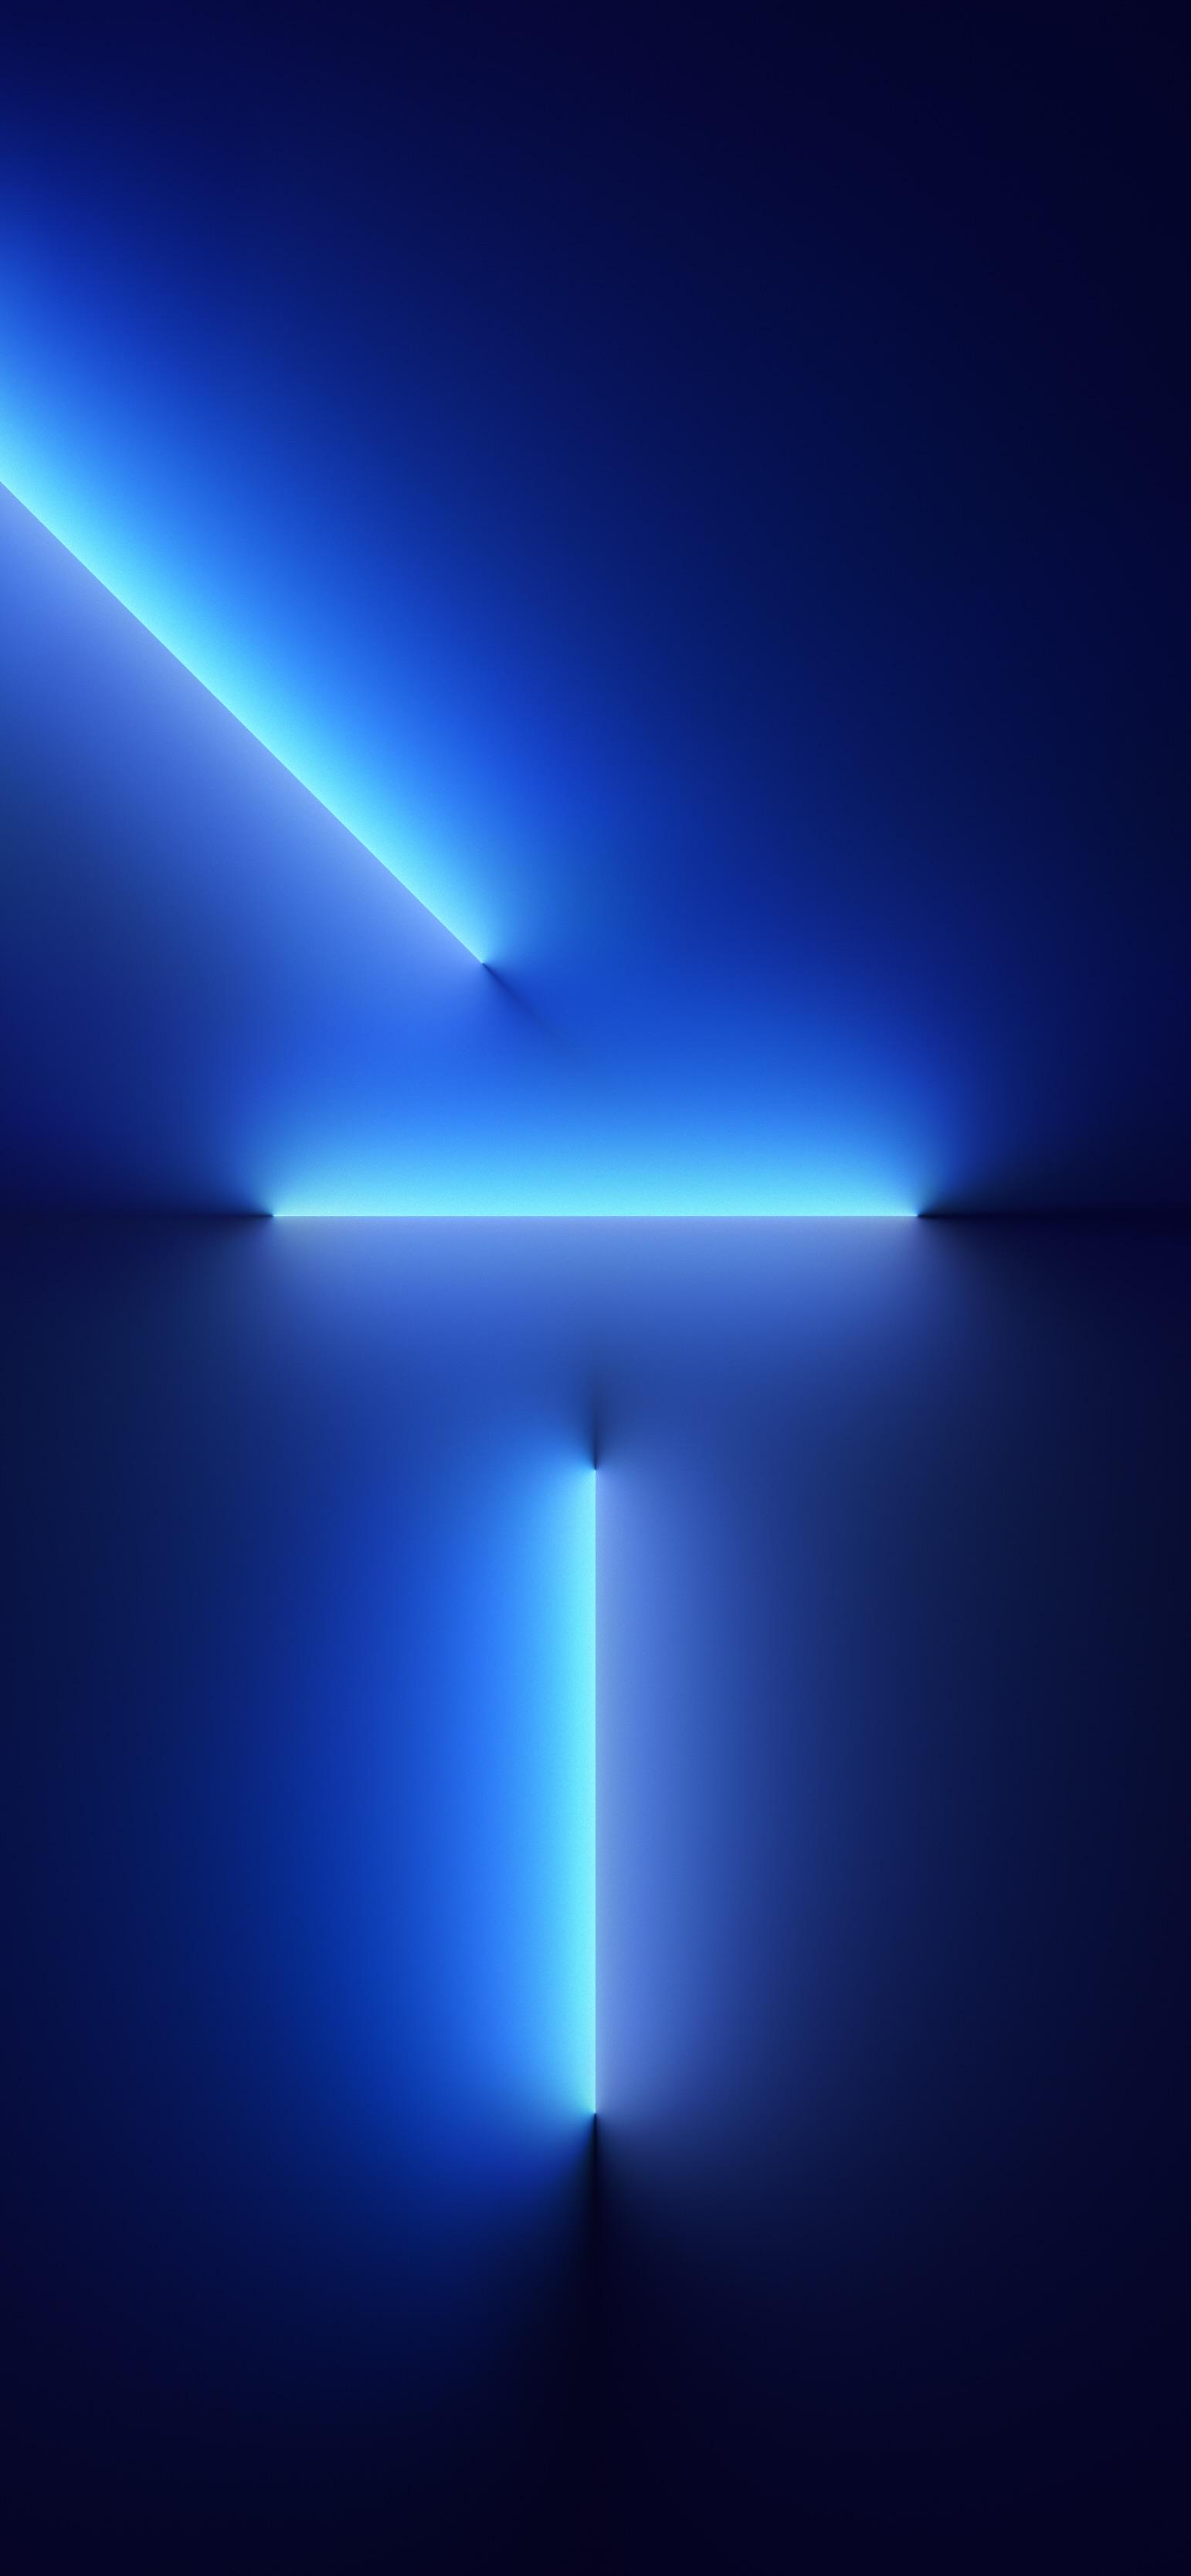 iPhone 12 Pro Max Blue Wallpapers - Top Free iPhone 12 Pro Max Blue ...